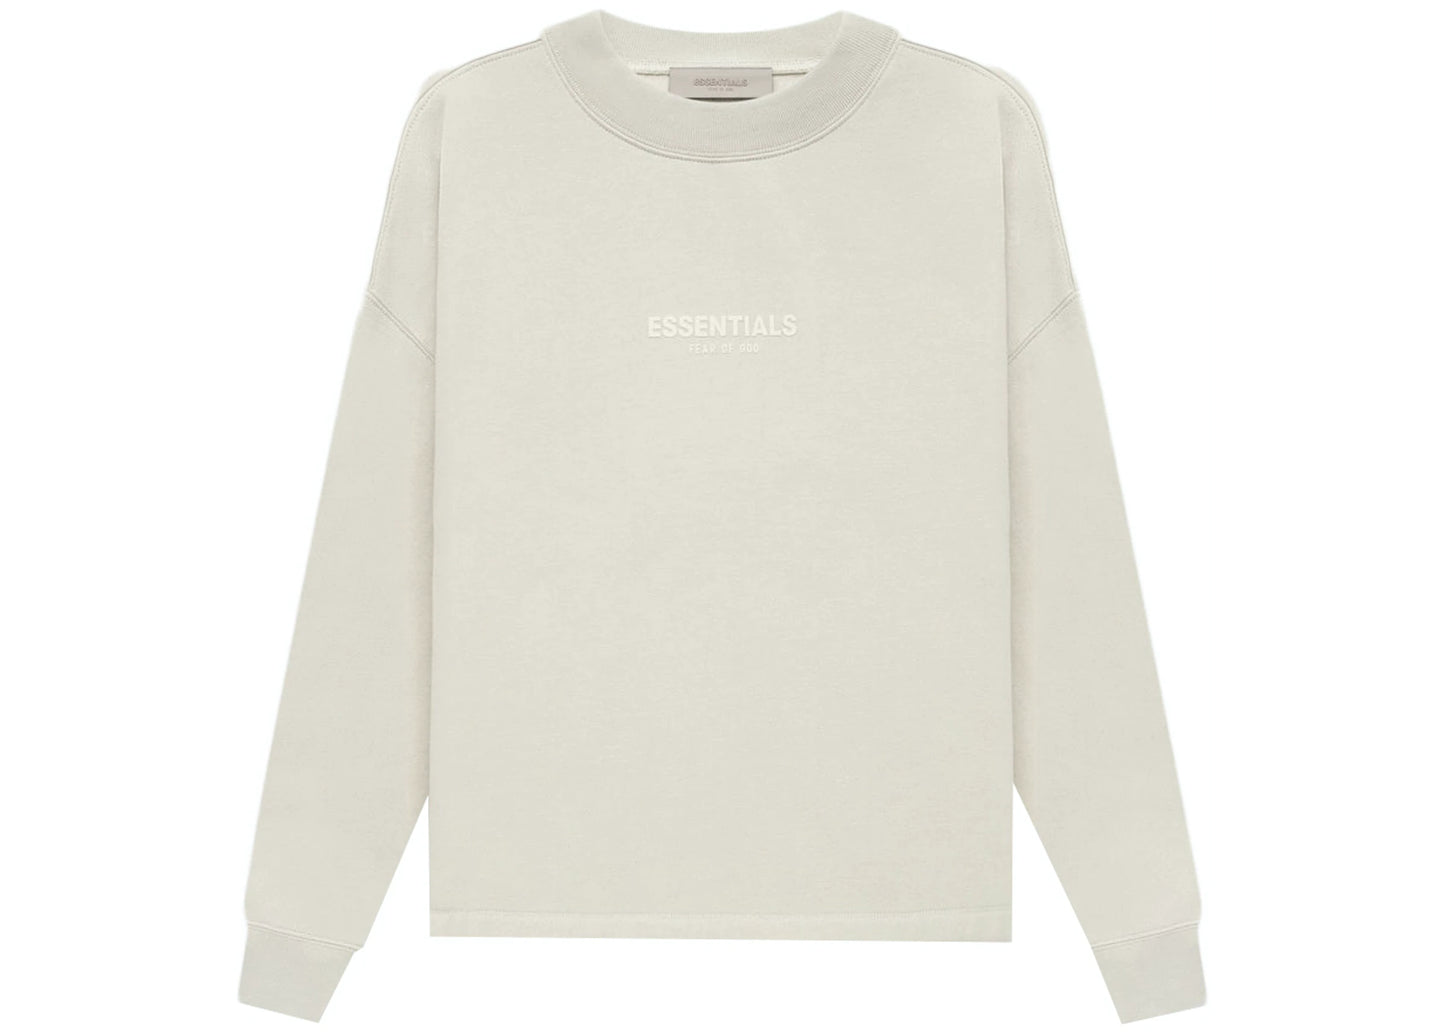 Fear of God Essentials Relaxed Crewneck Wheat #